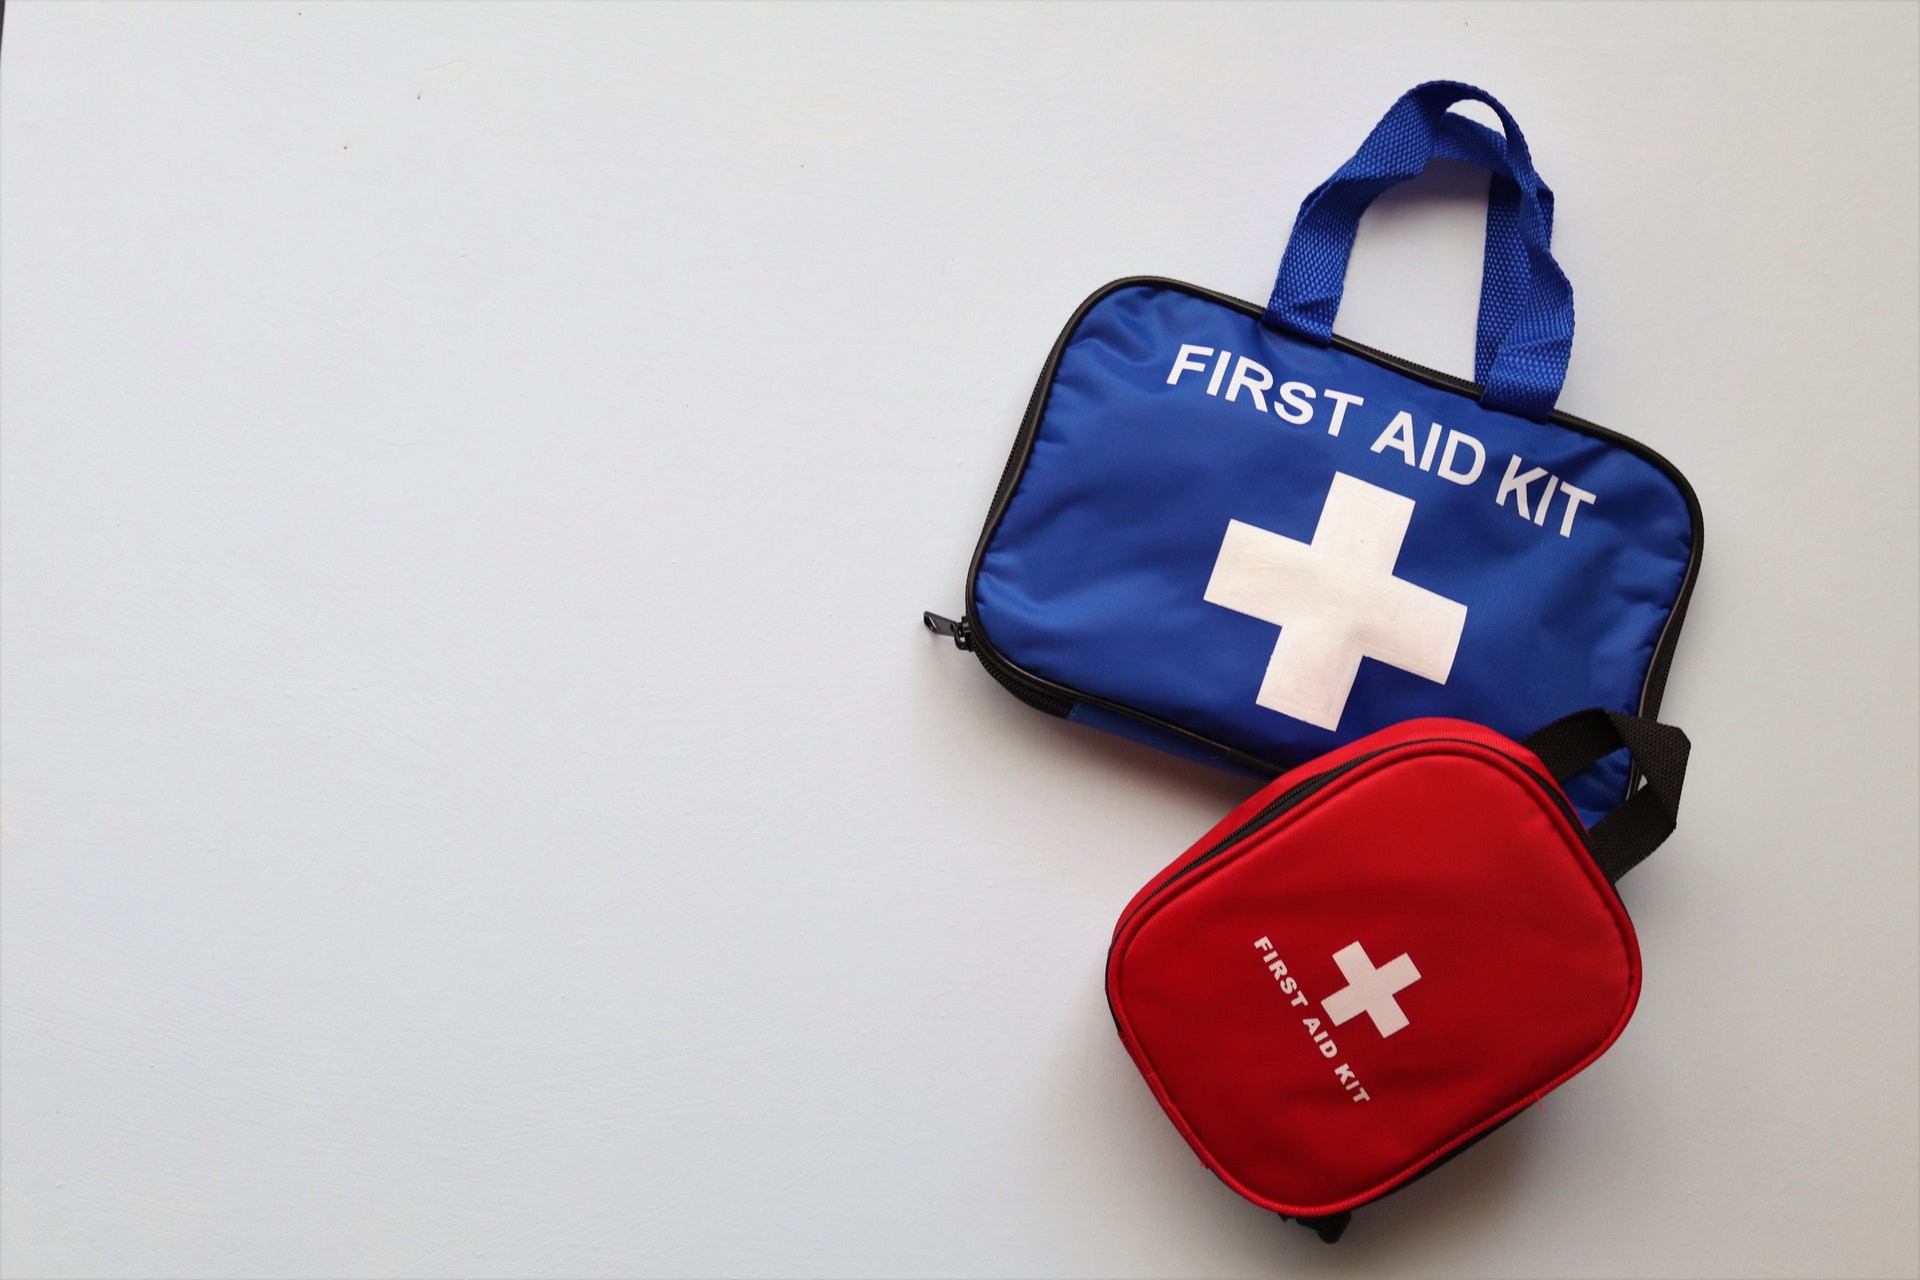 travelers' first aid kit